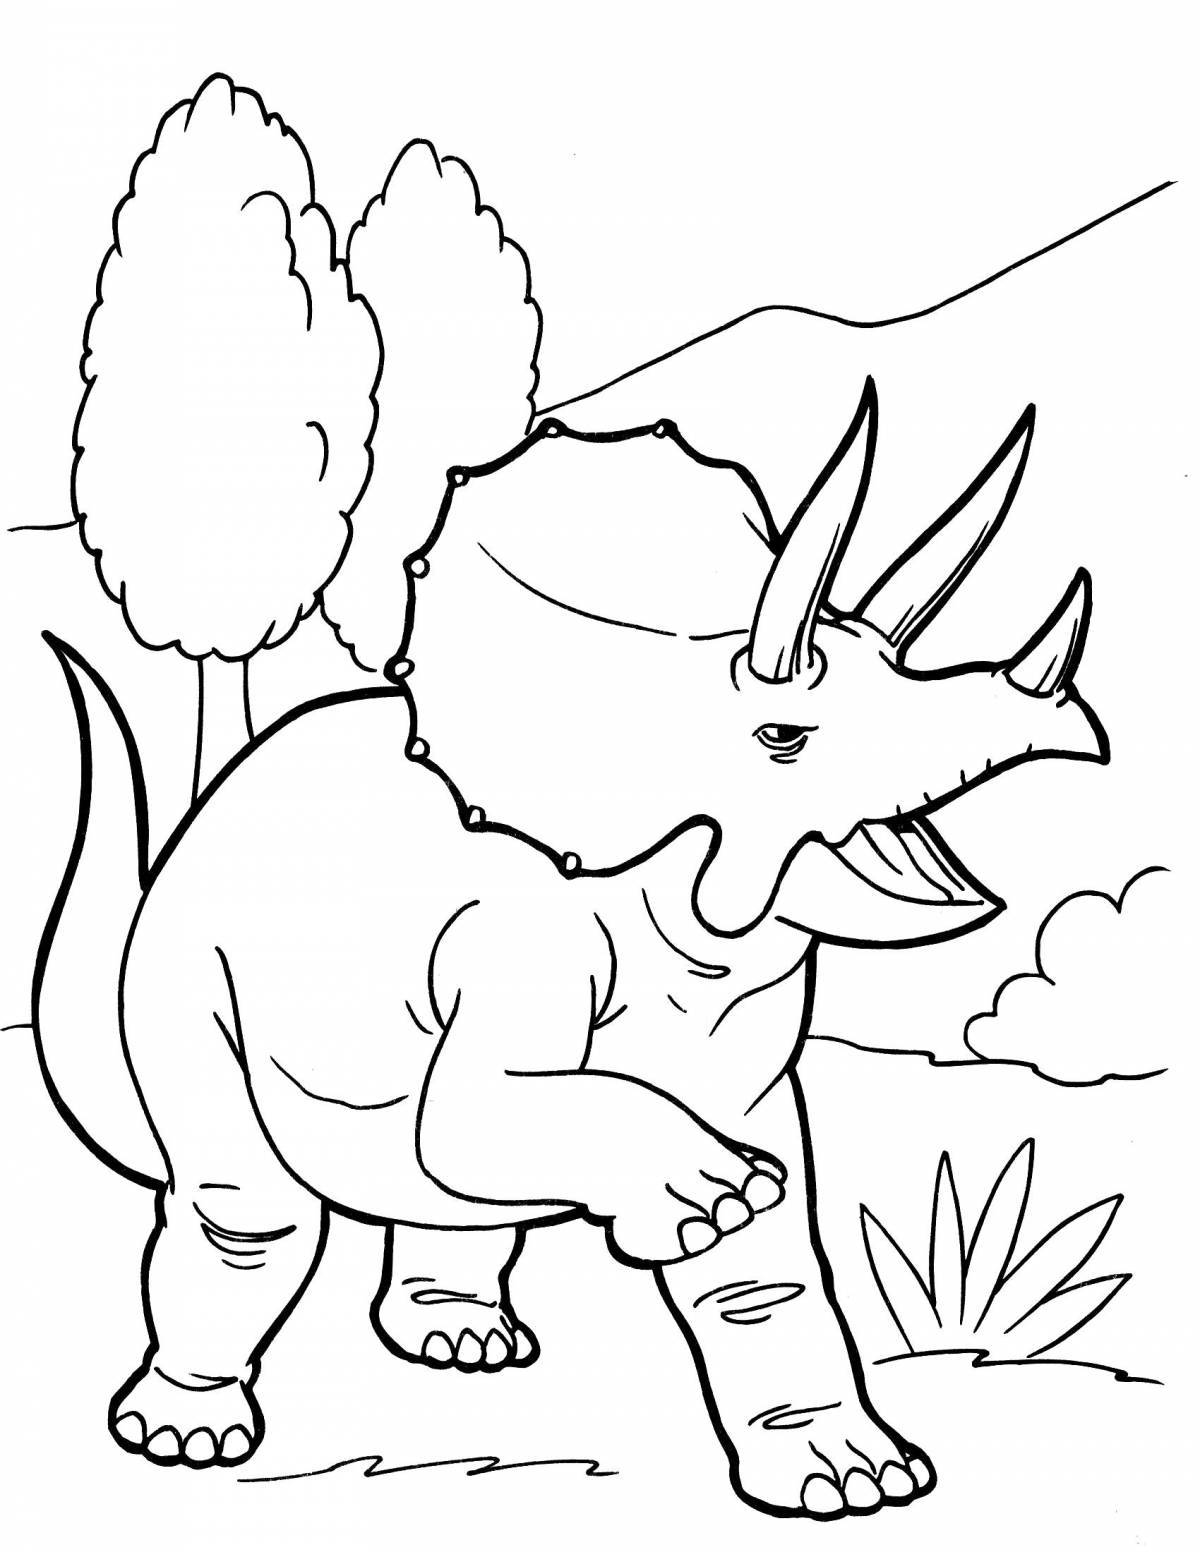 Attractive dinosaur coloring book for kids